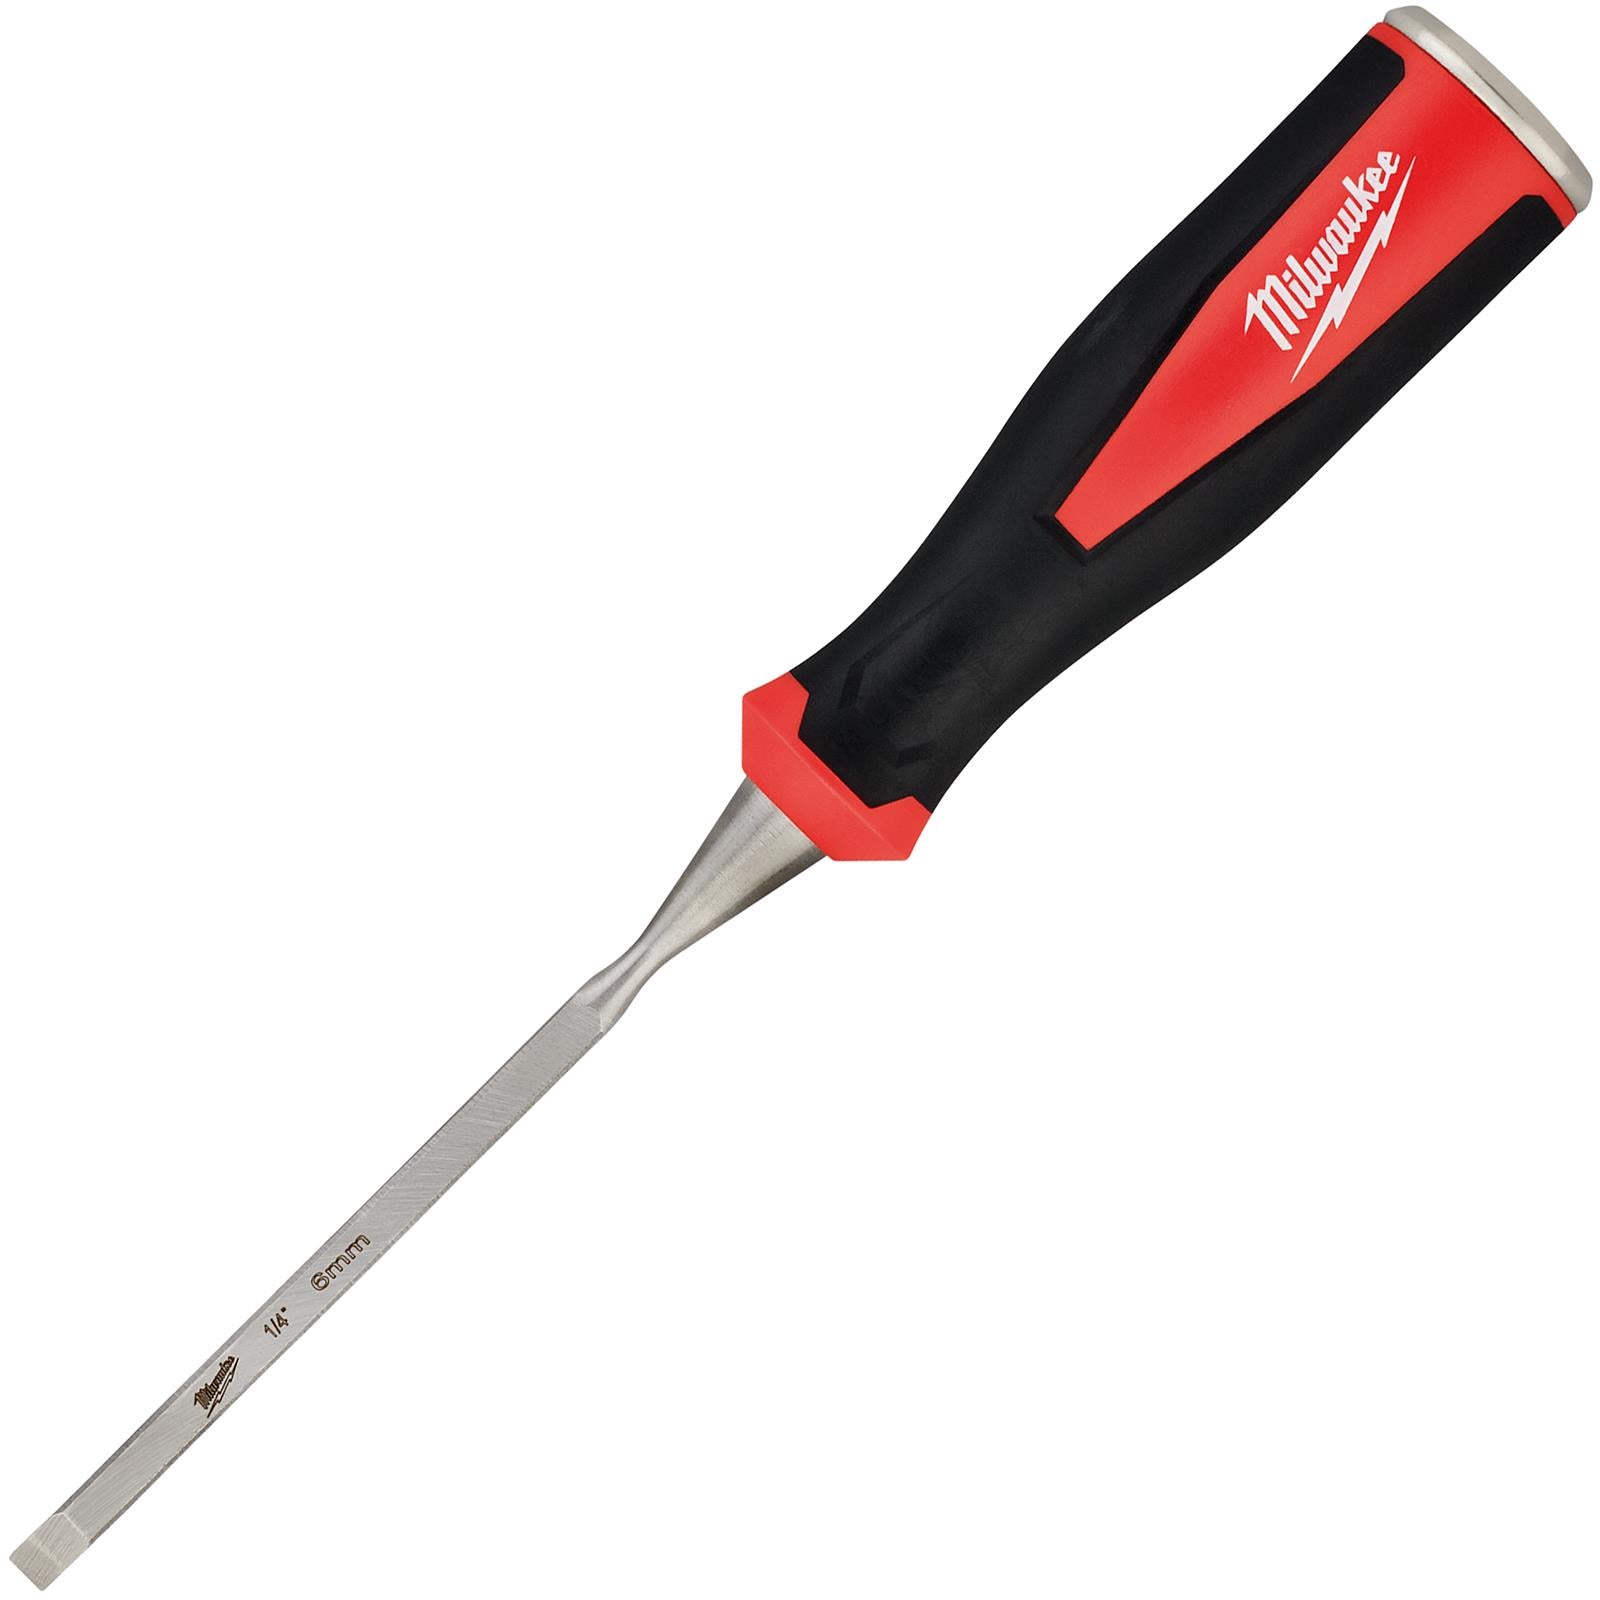 Milwaukee Beveled Edge Wood Chisel 6mm 1/4" All Metal Core with Striking Cap